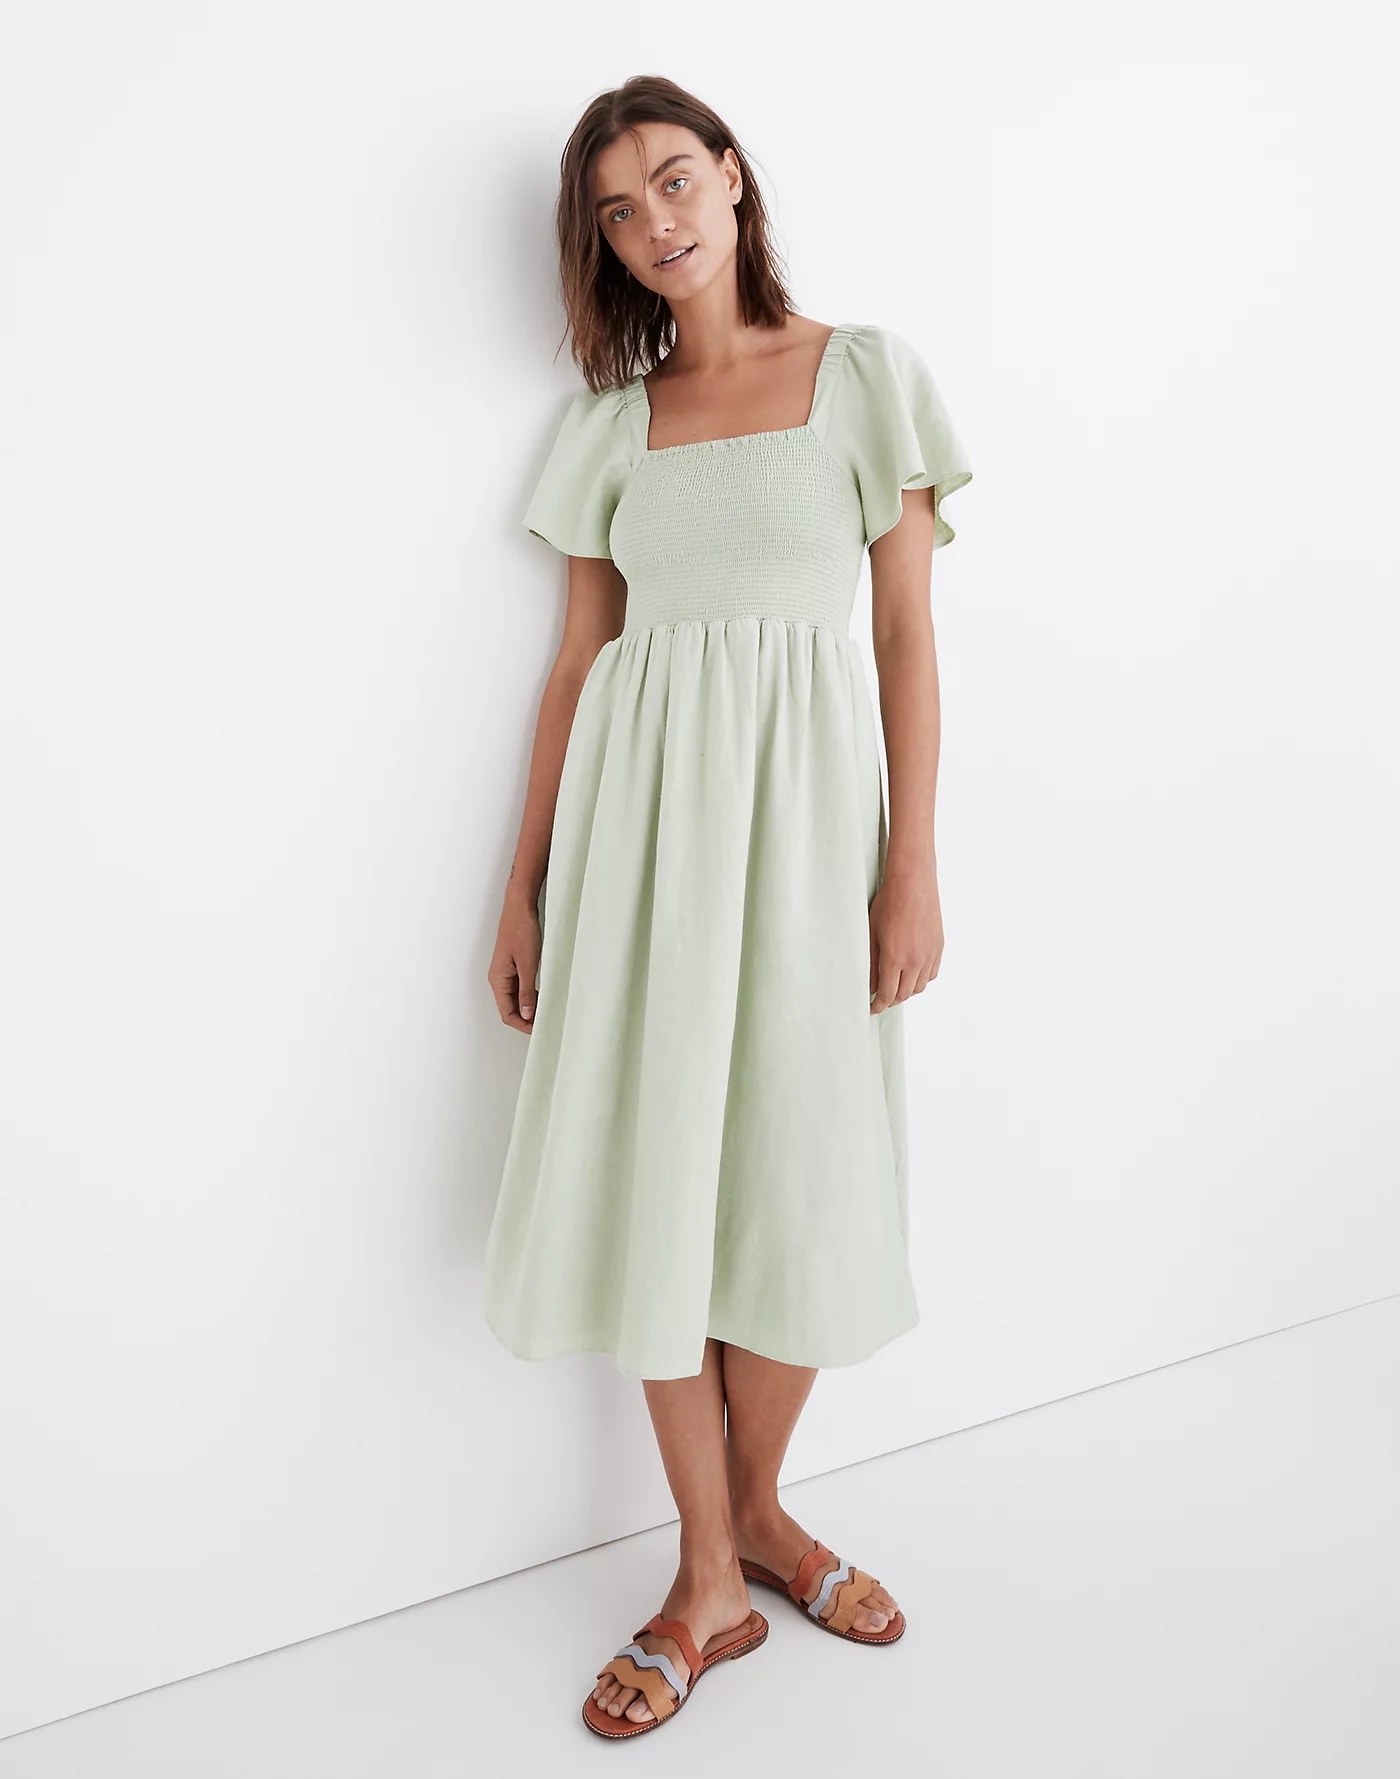 20 New Madewell Items to Order for ...